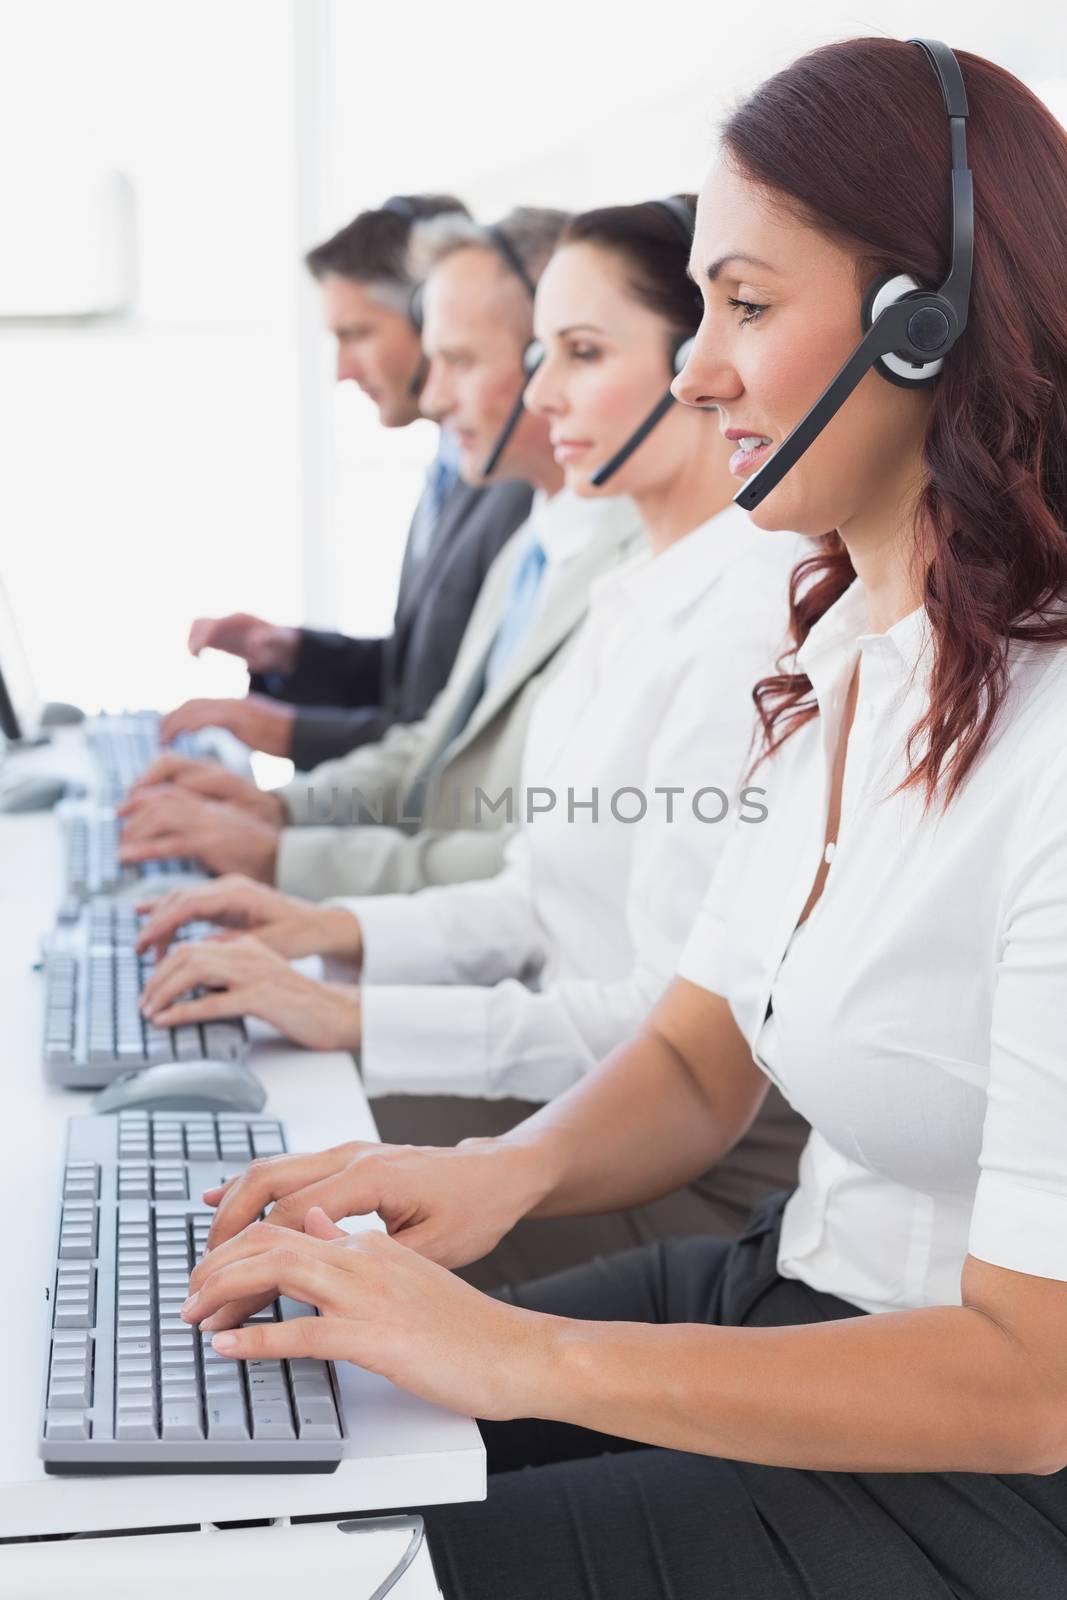 Employees typing on their computers by Wavebreakmedia